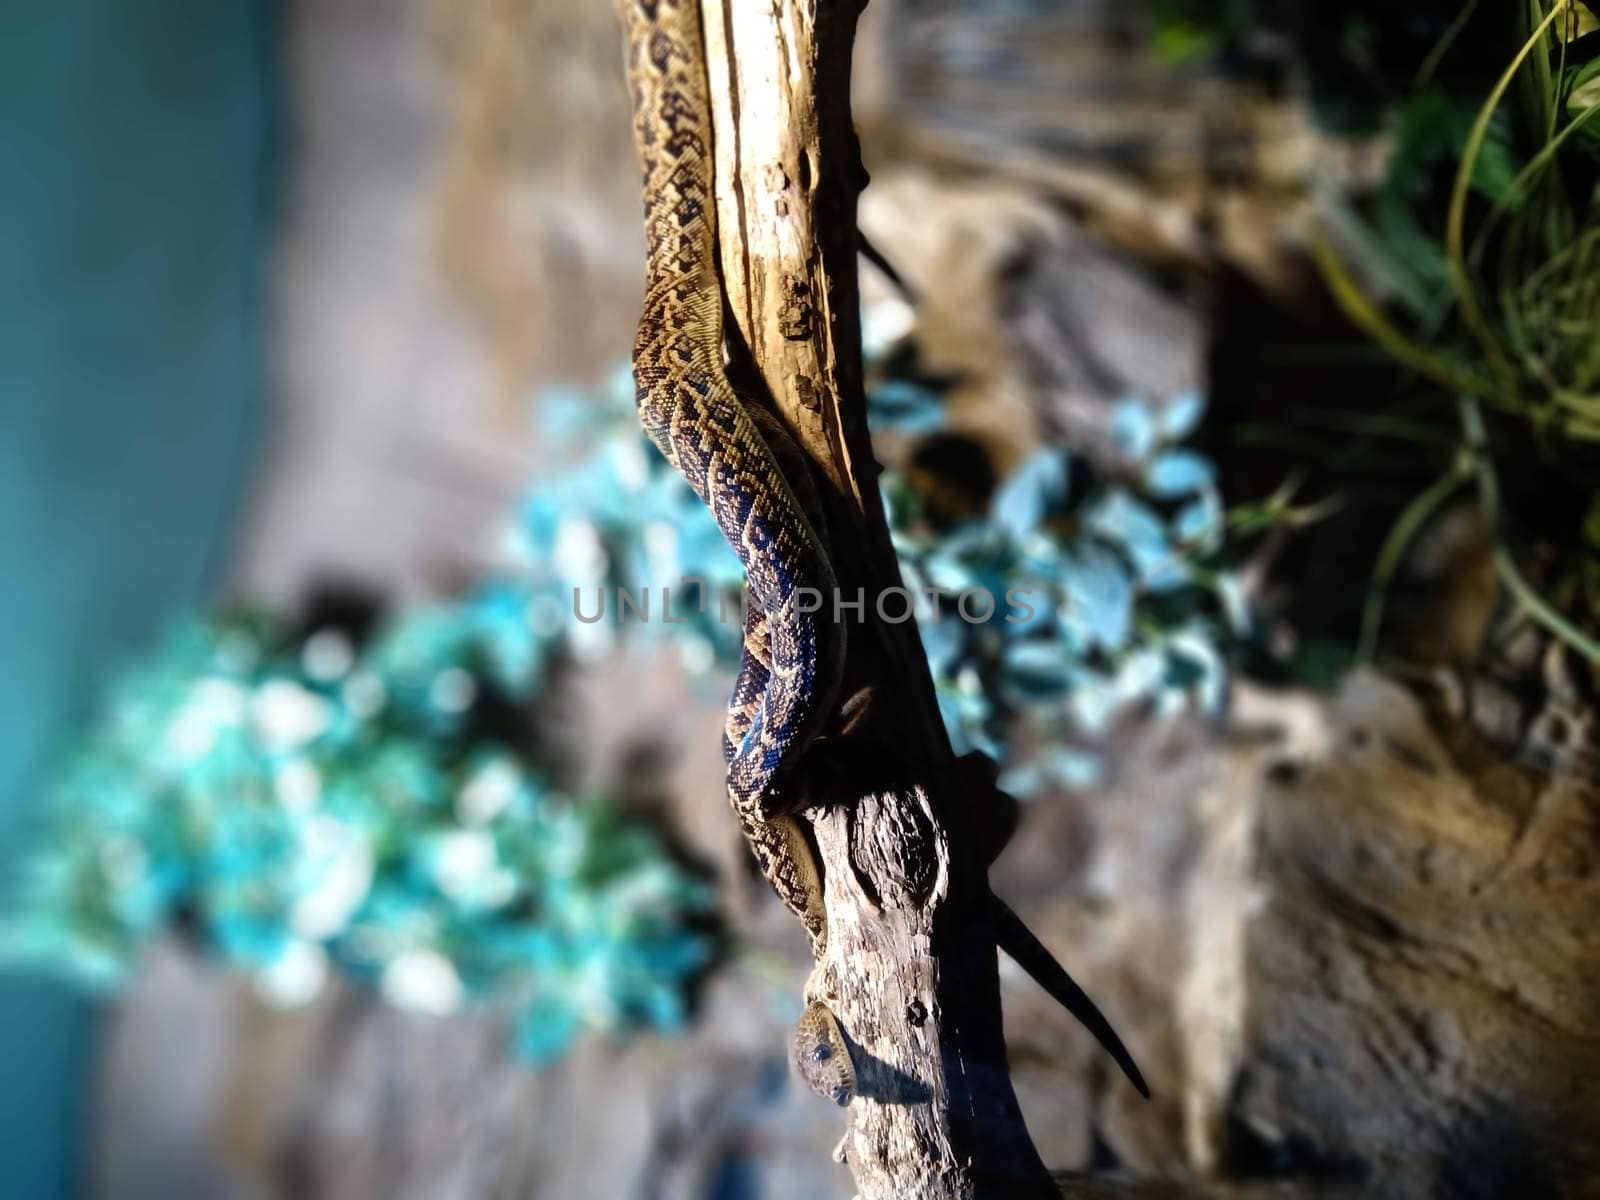 Brown snake at the zoo by balage941